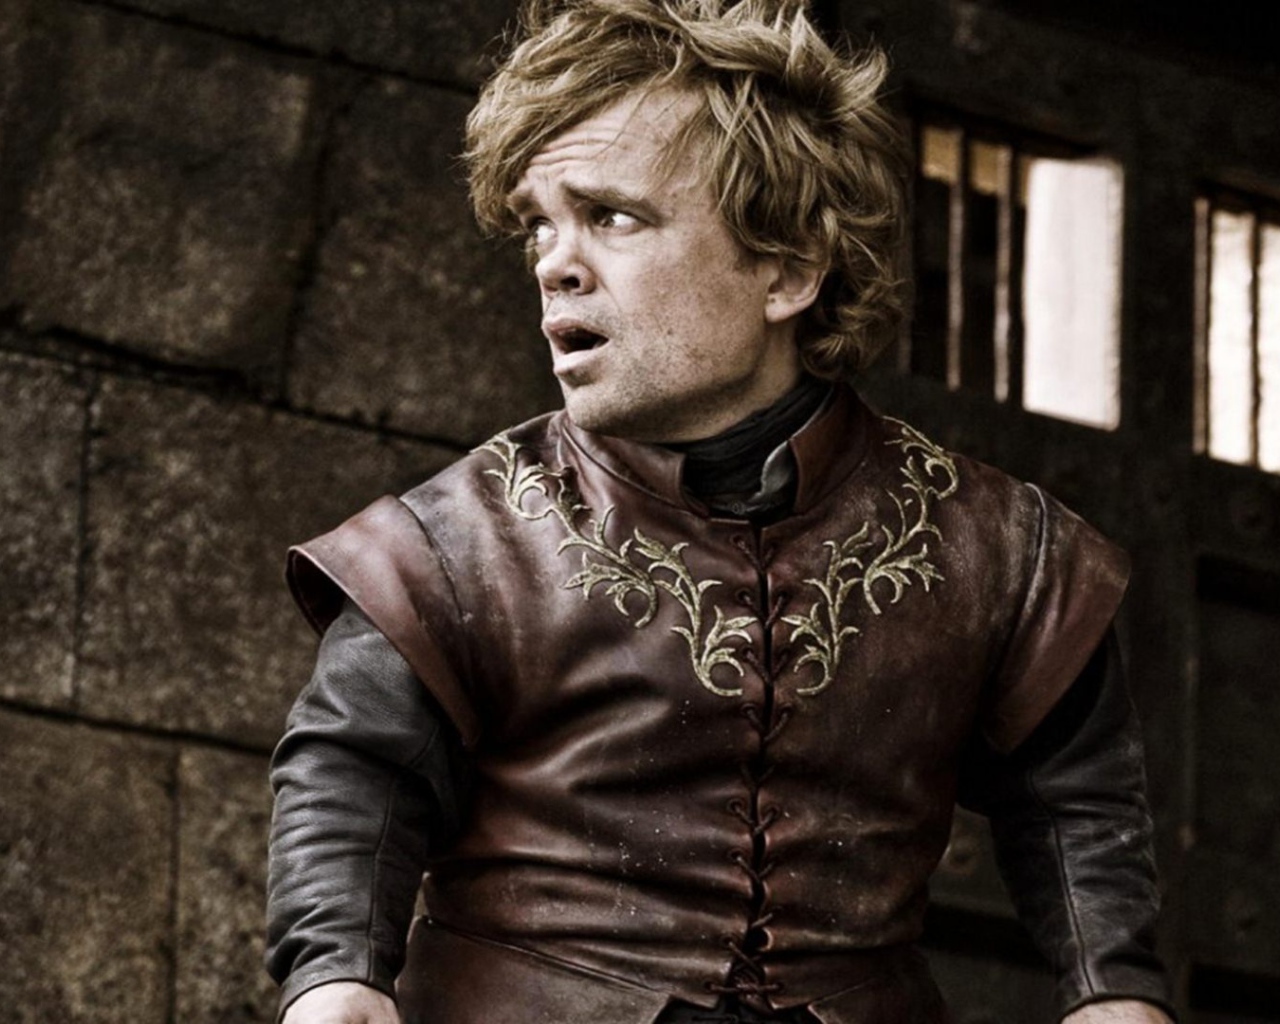 The popular actor Peter Dinklage or Tyrion Lannister